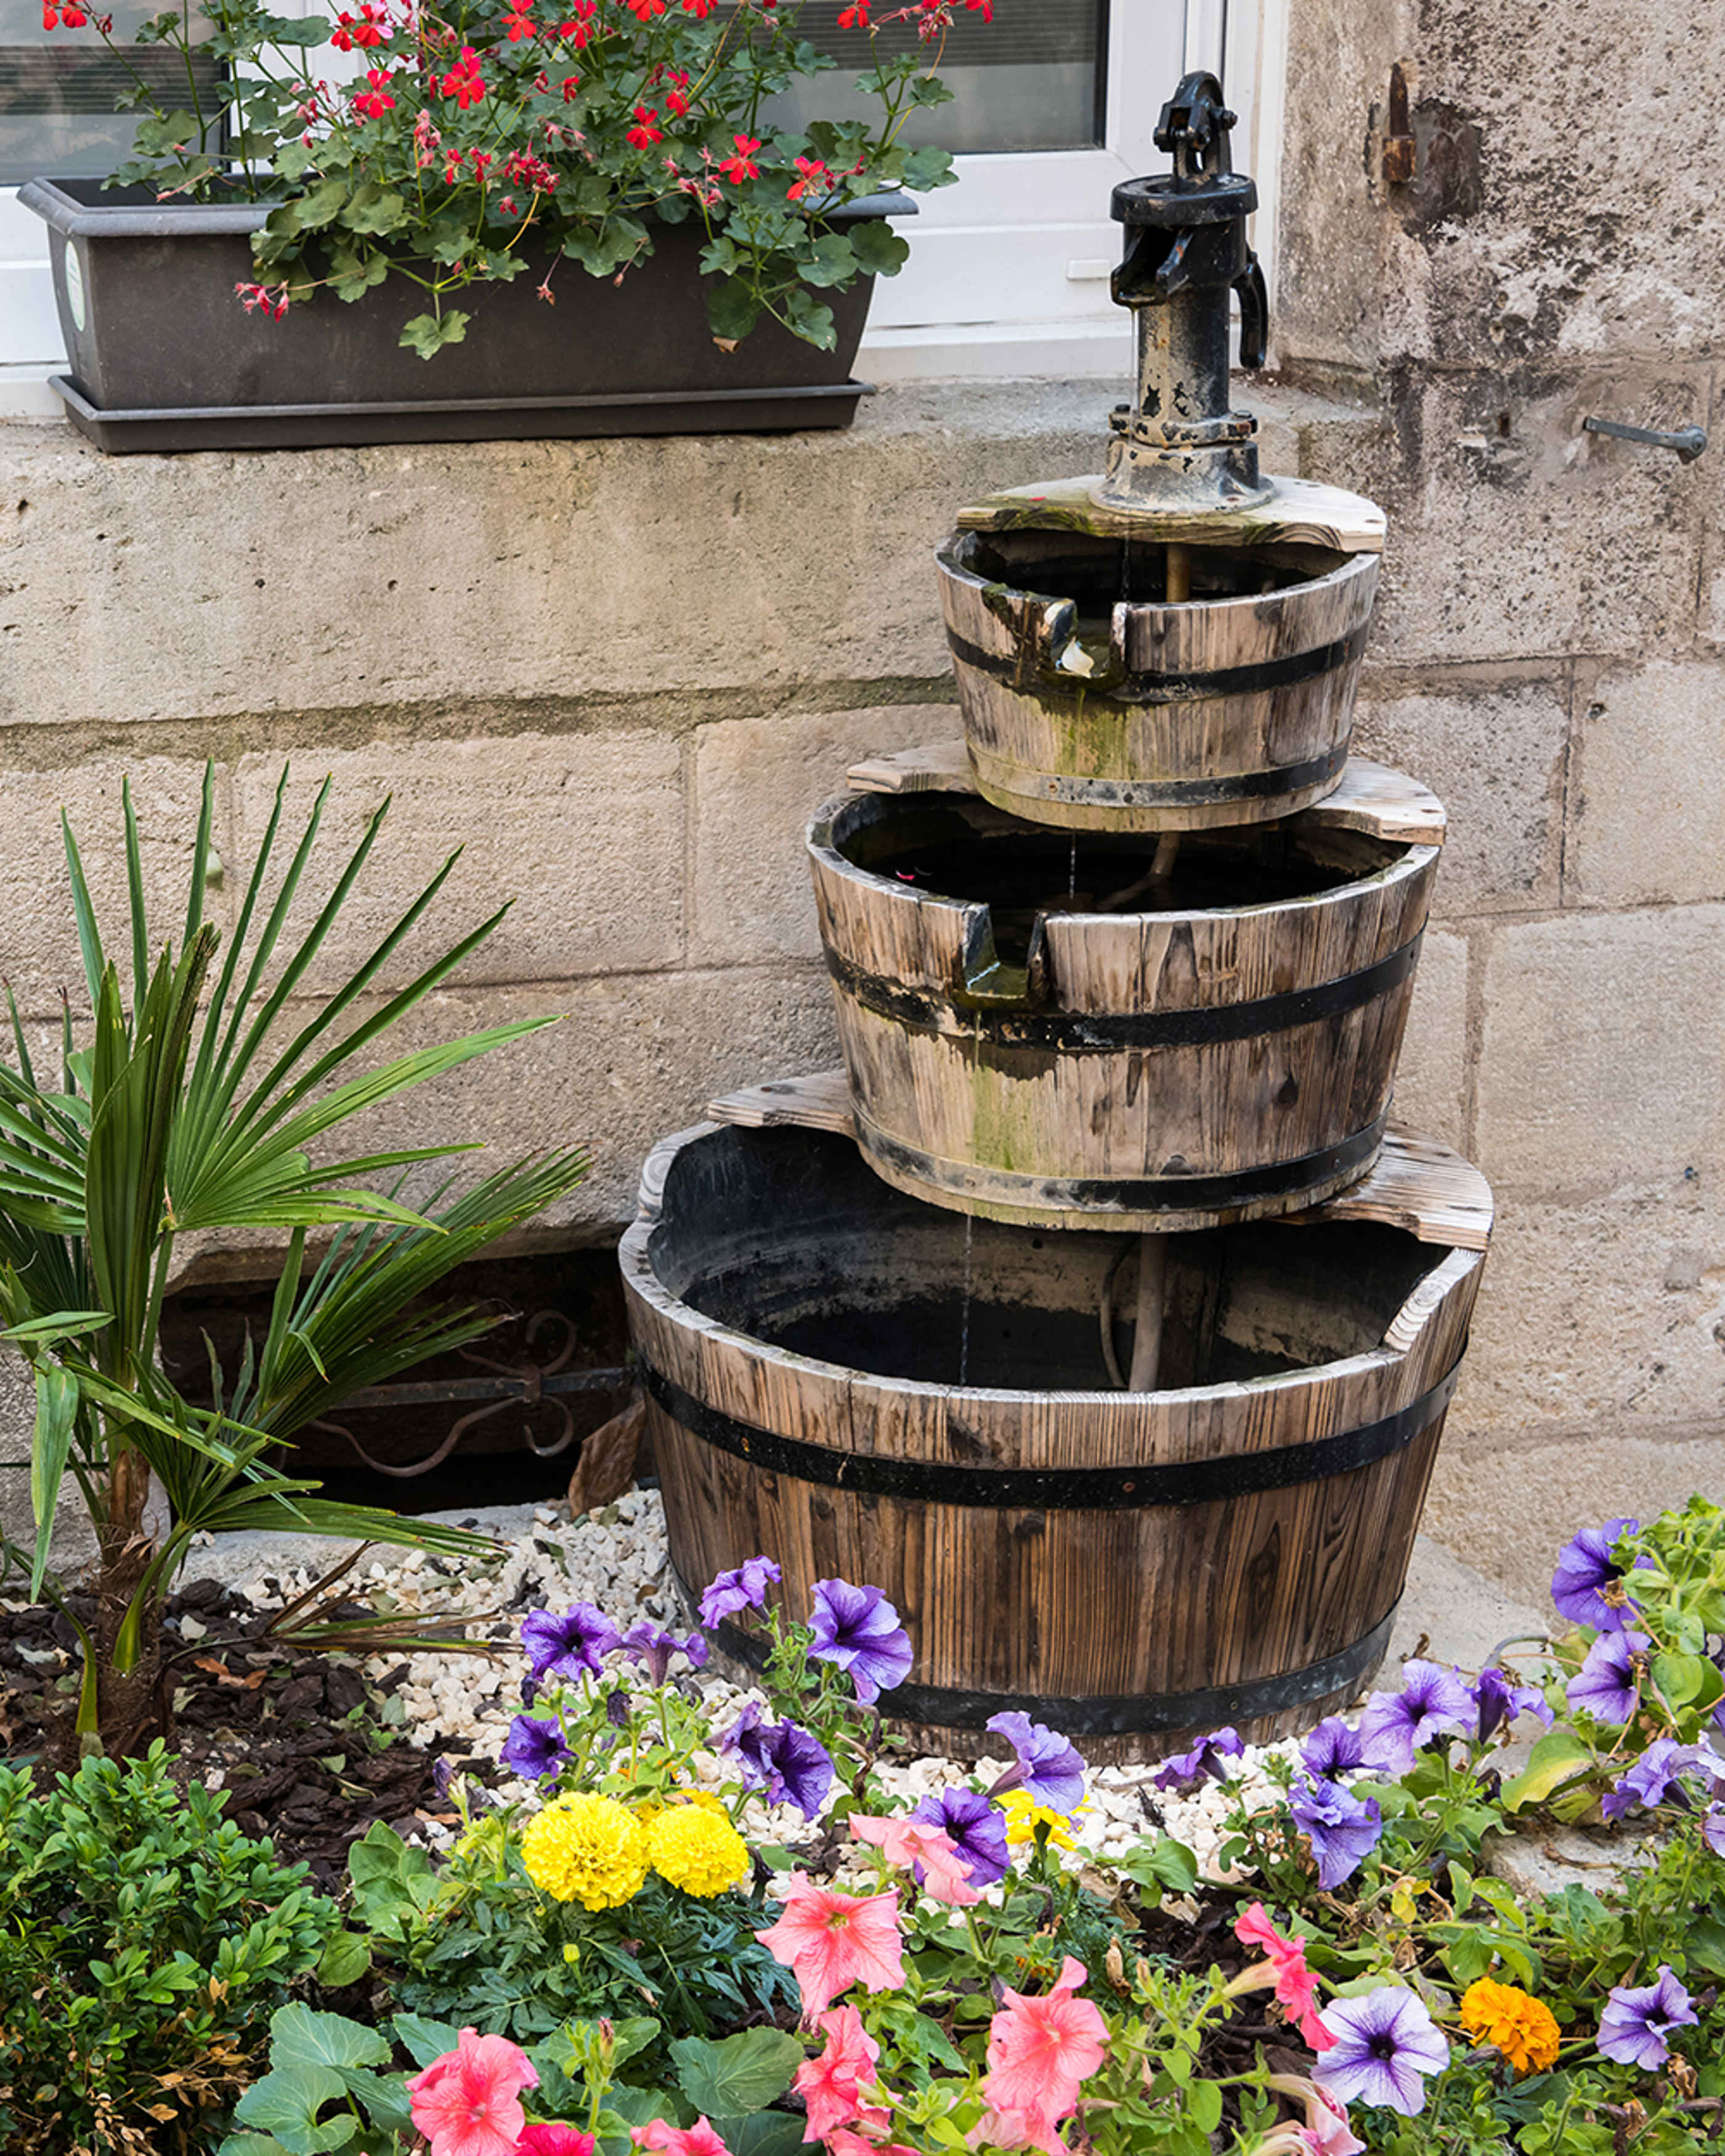 A wooden water feature in a garden surrounded by flowers